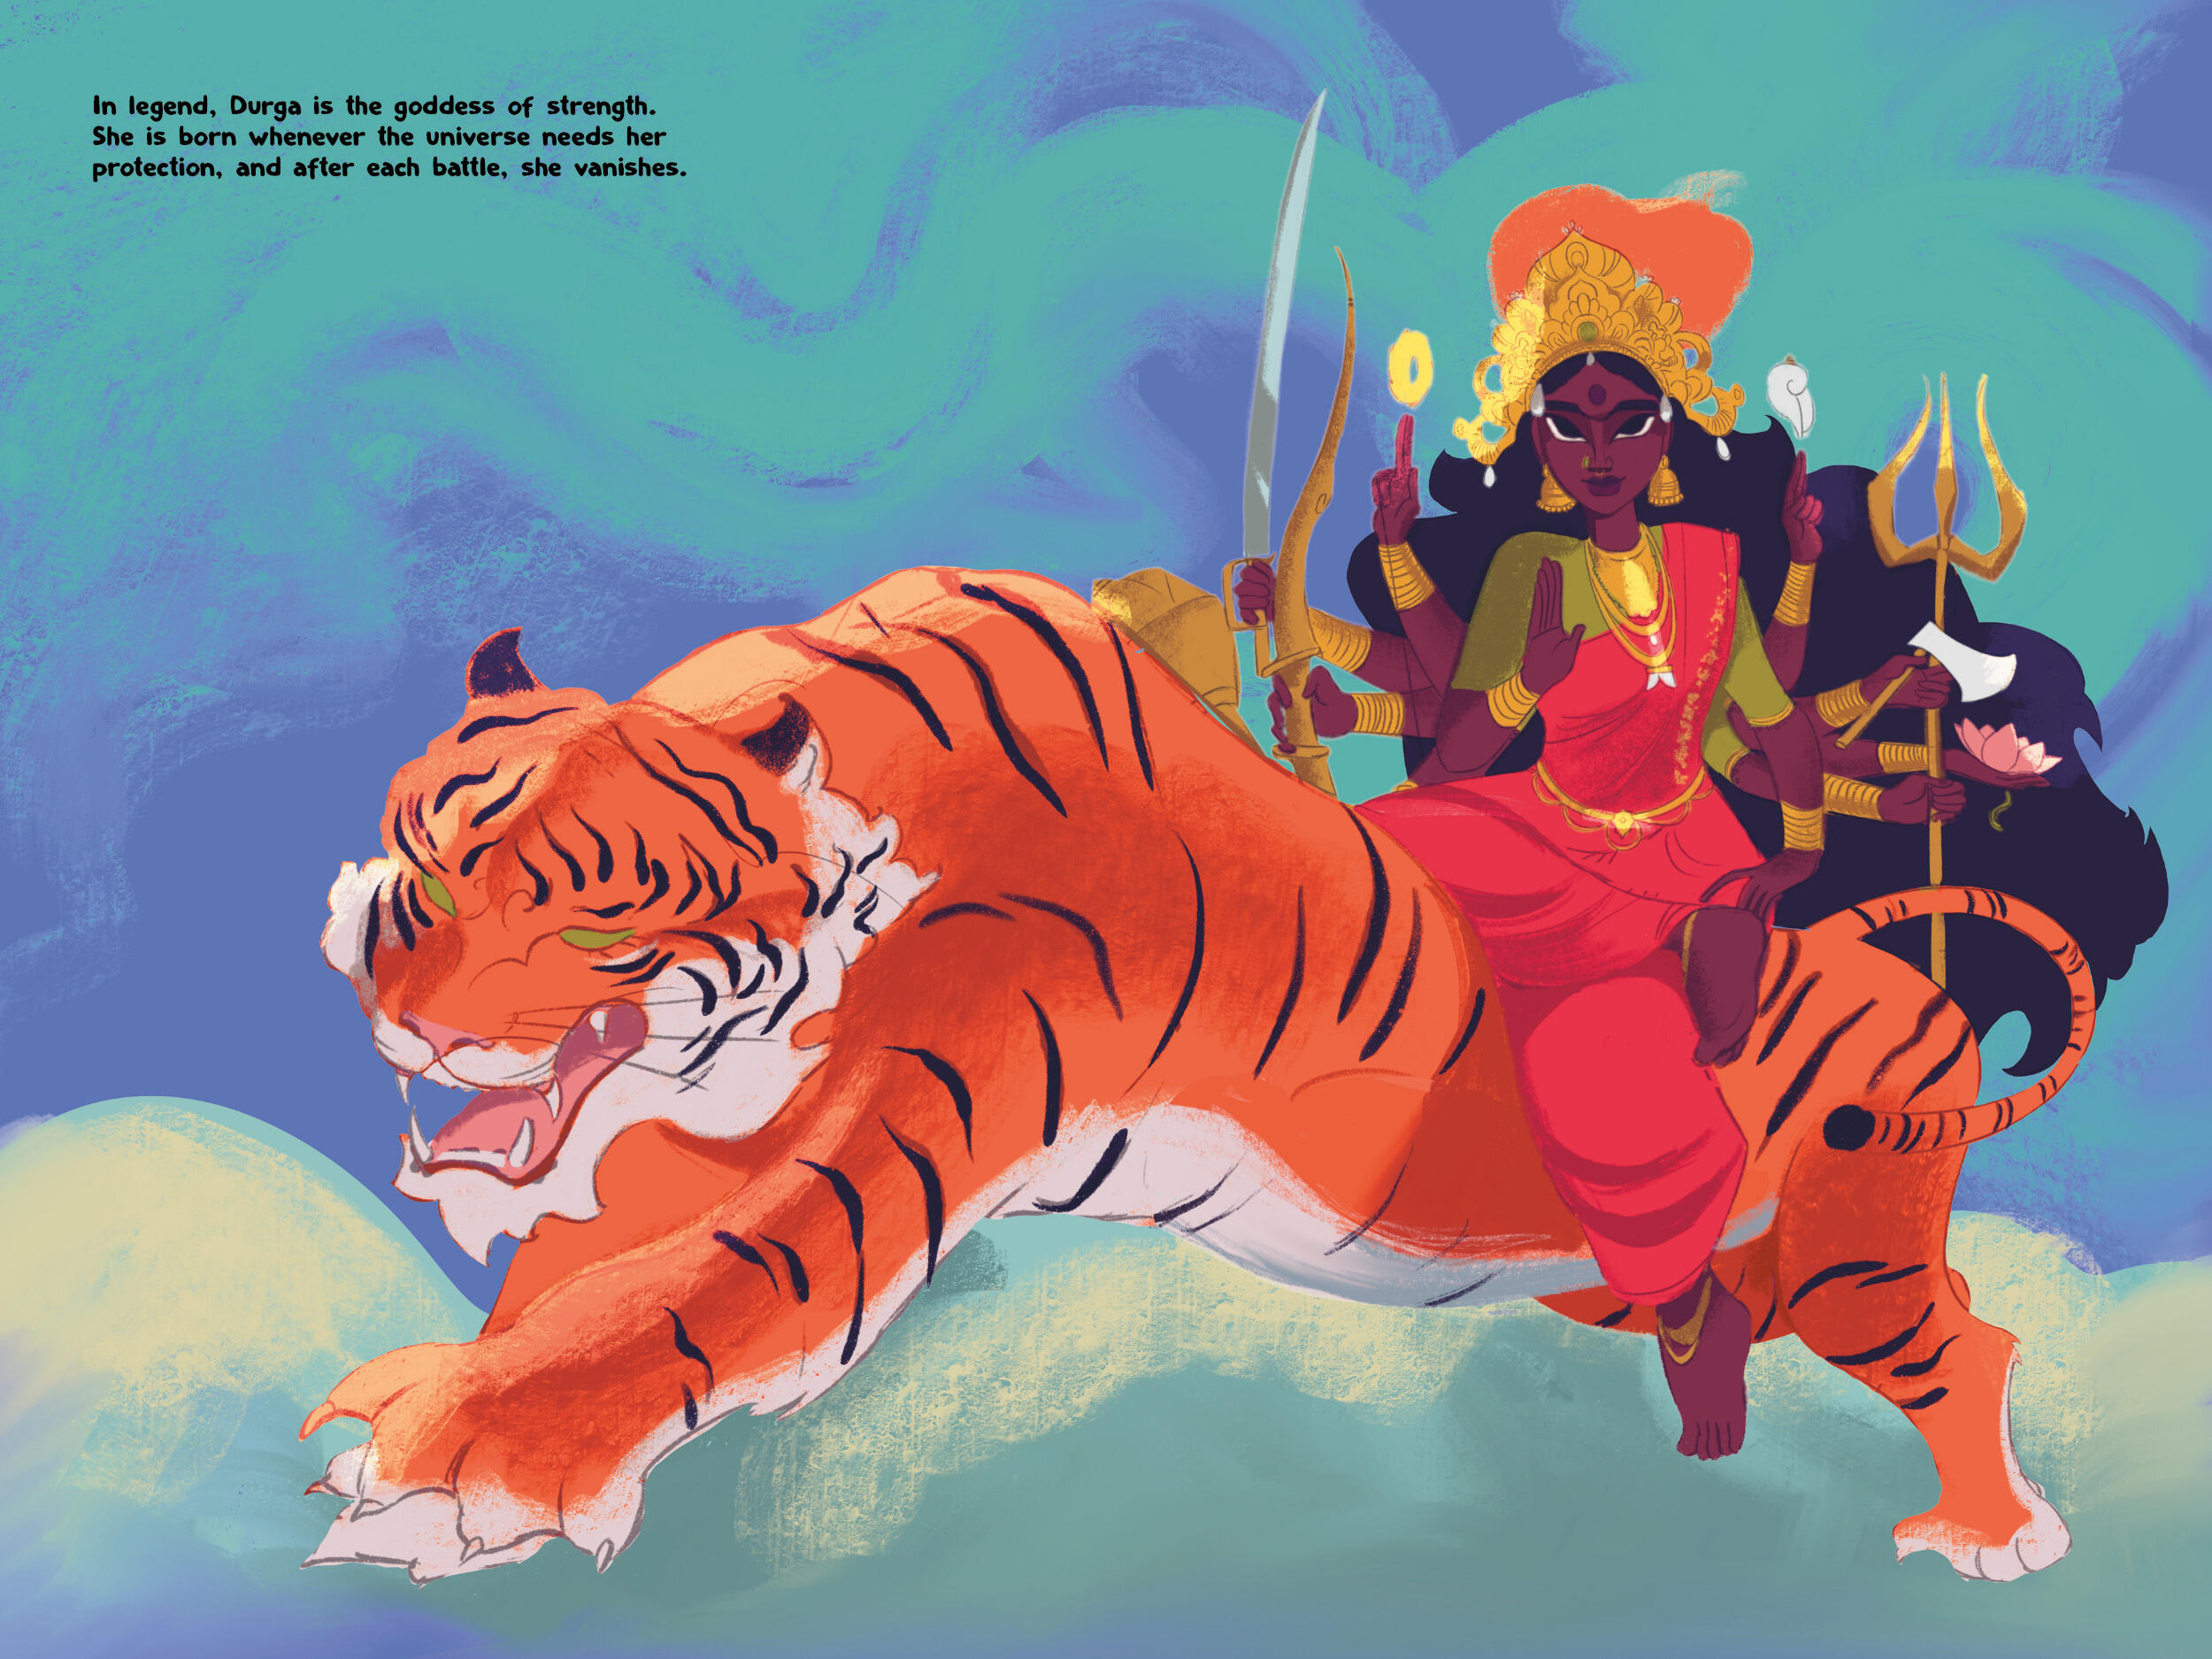 An illustration of Durga, a Hindu goddess depicted with eight arms, six holding a different item - a sword, a bow, a feather, a magical orb, a trident, a hatchet and a flower - while the other two are held in front of her and at her side. She rides atop a tiger. The text reads: “In legend, Durga is the goddess of strength. She is born whenever the universe needs her protection, and after each battle, she vanishes.”